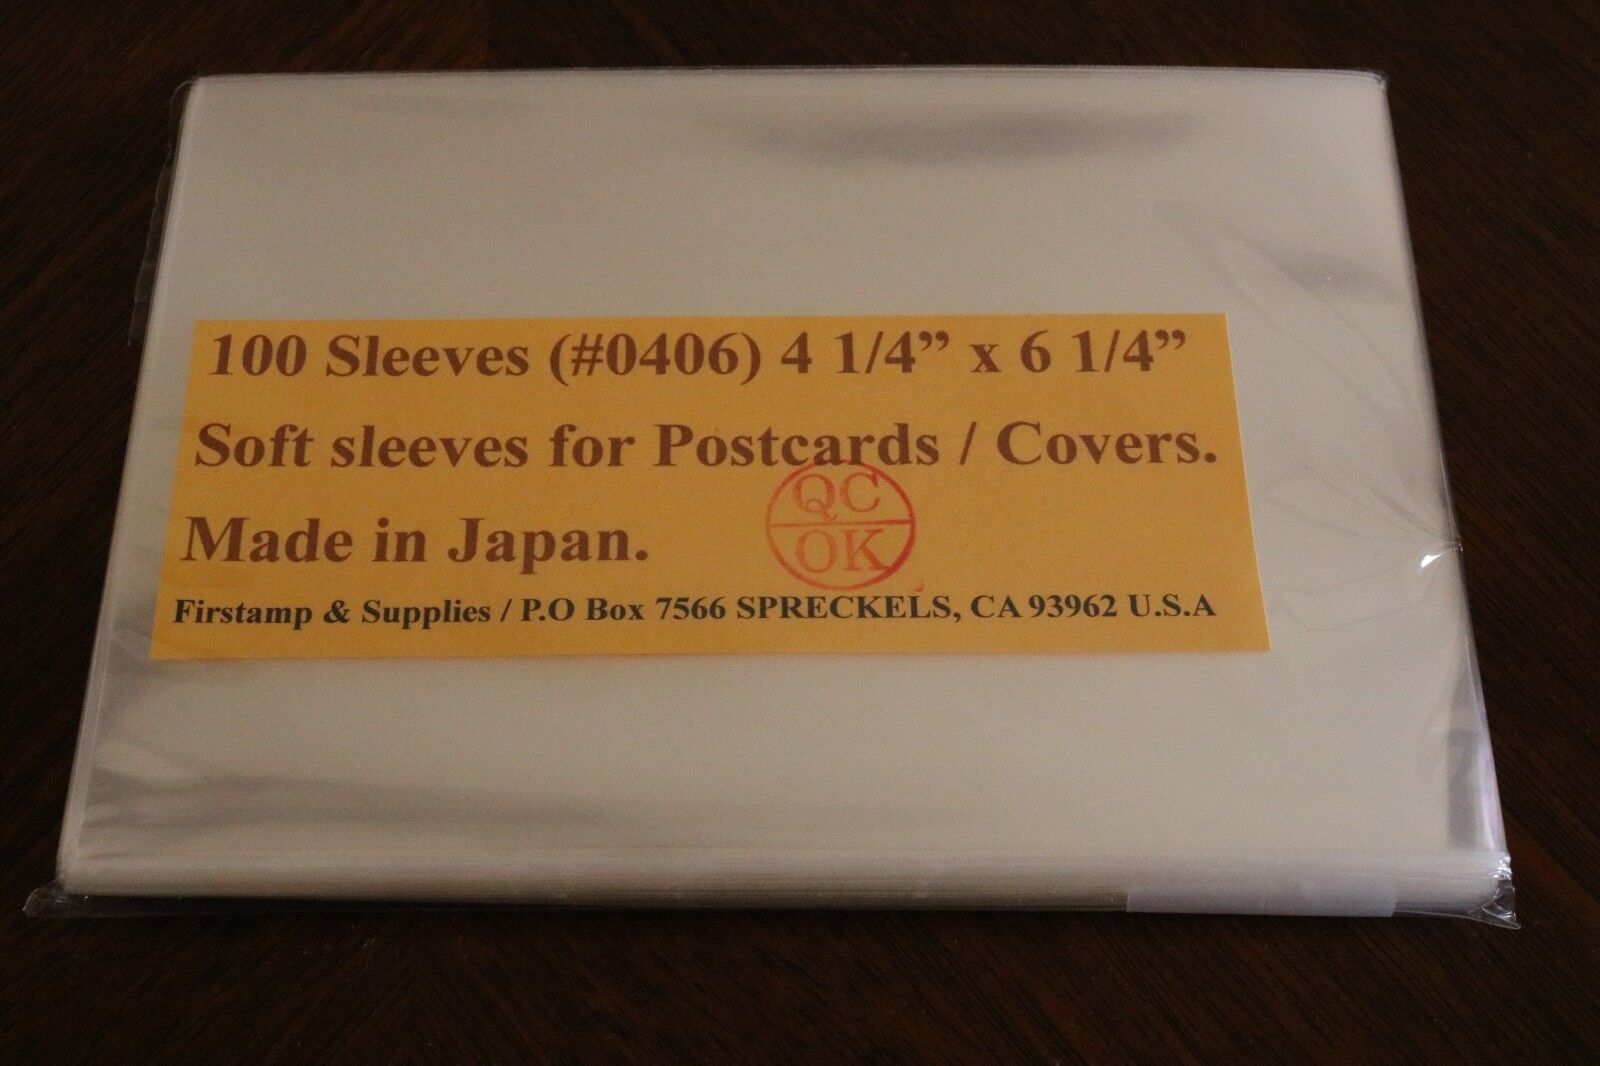 200 Sleeves for Postcards / Covers size 4 1/4\